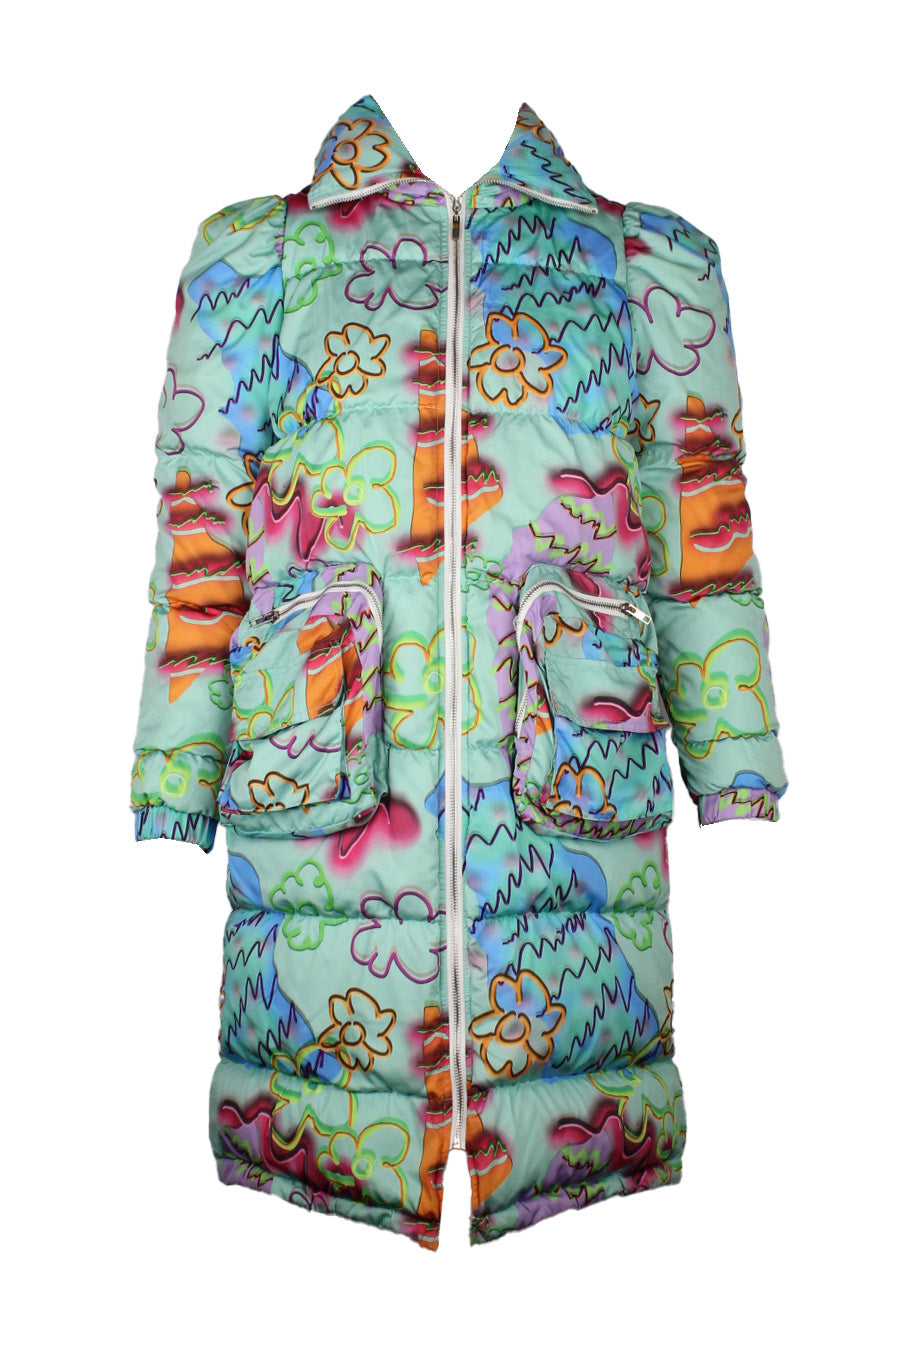 description: colin locascio multicolor doodle print long sleeve puffer jacket. features zipper closure at center front, zip closure pockets at front, and high neck. 